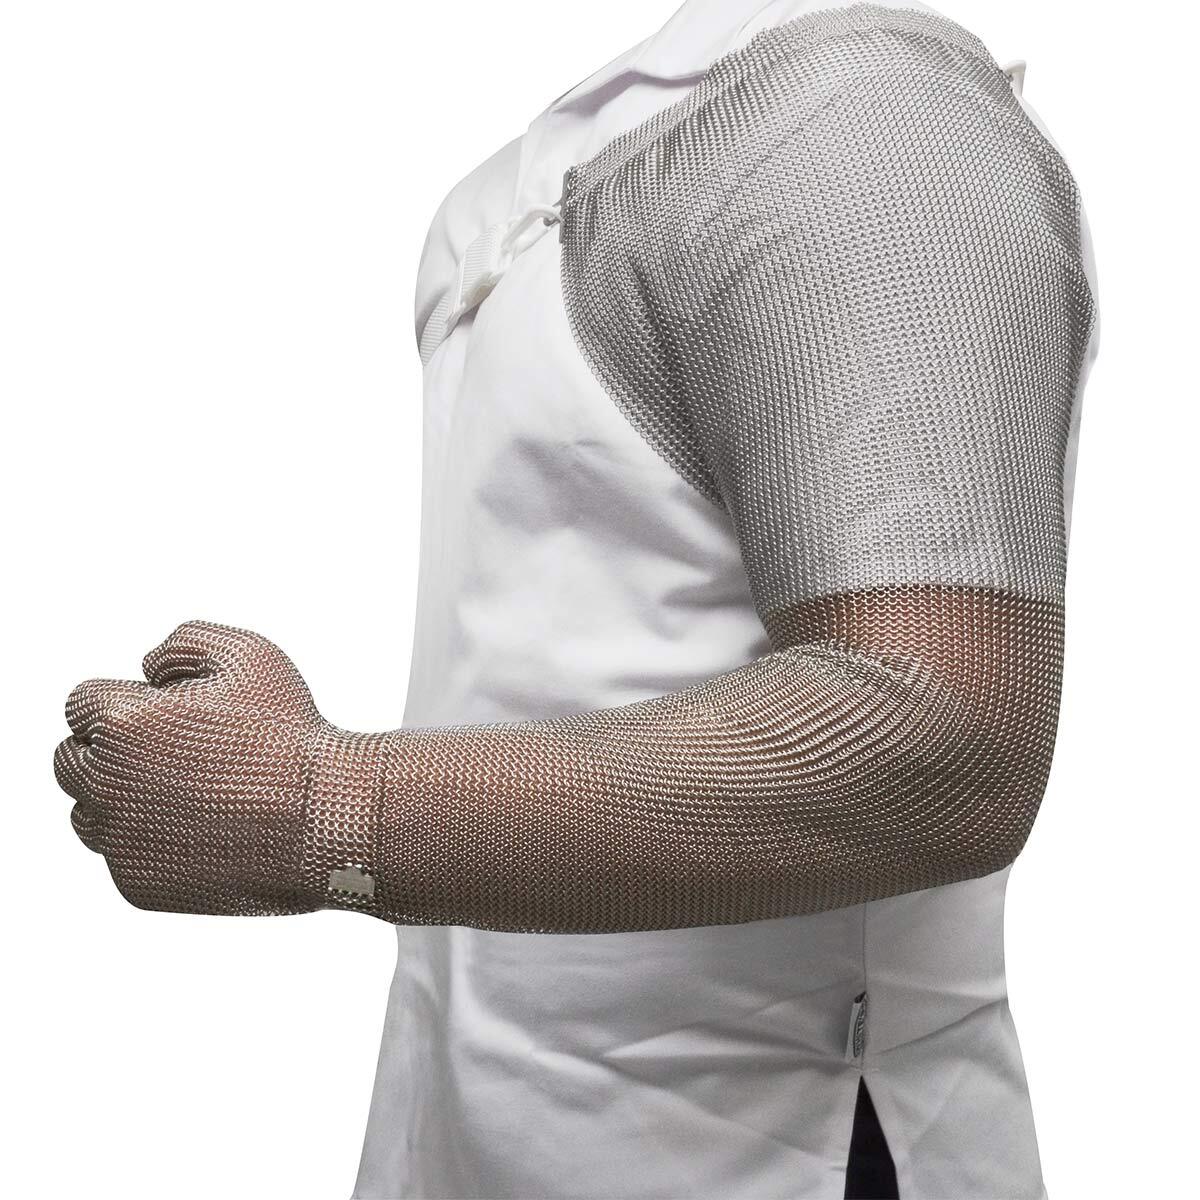 Manulatex Chain Mesh Sleeve, Shoulder Length with Spring